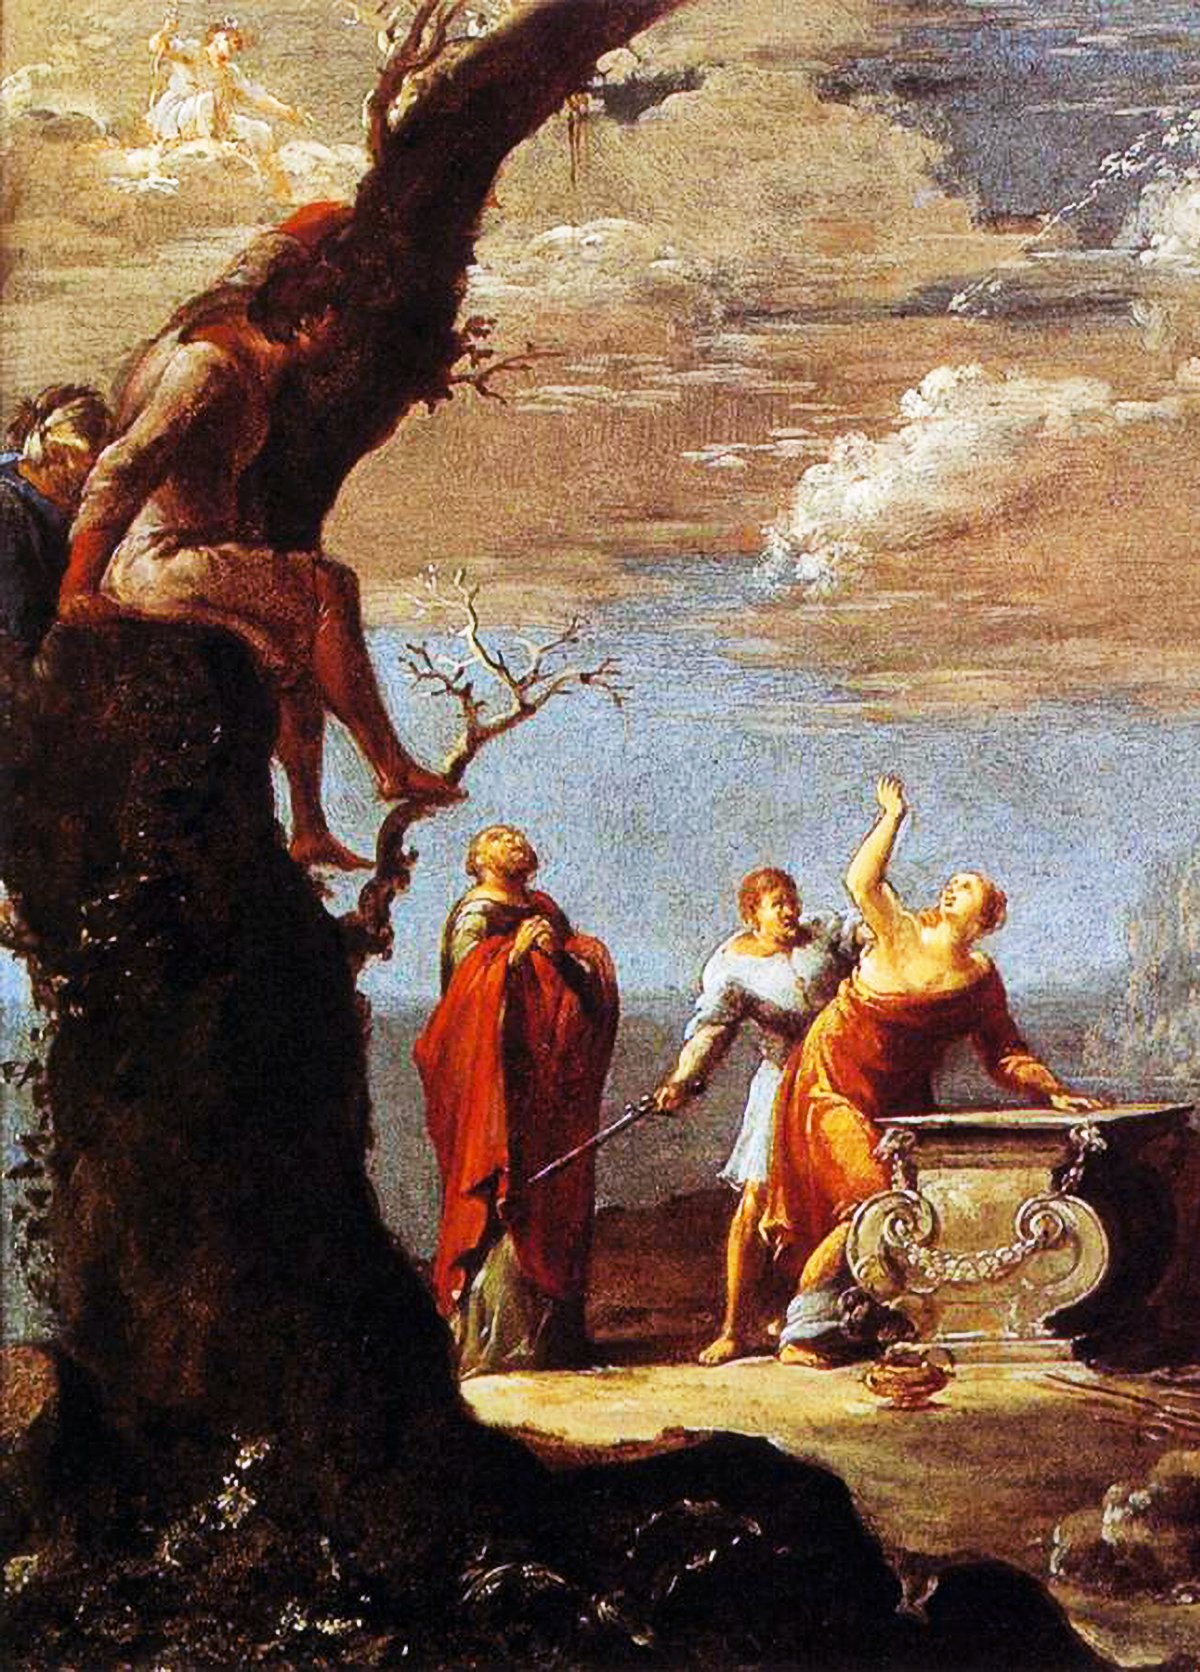  "The Sacrifice of Iphigenia" by Leonard Bramer, depicting a distraught Iphigenia at the altar, her father Agamemnon in a red cloak, and a priest with a knife, with an angelic figure above signaling divine intervention.